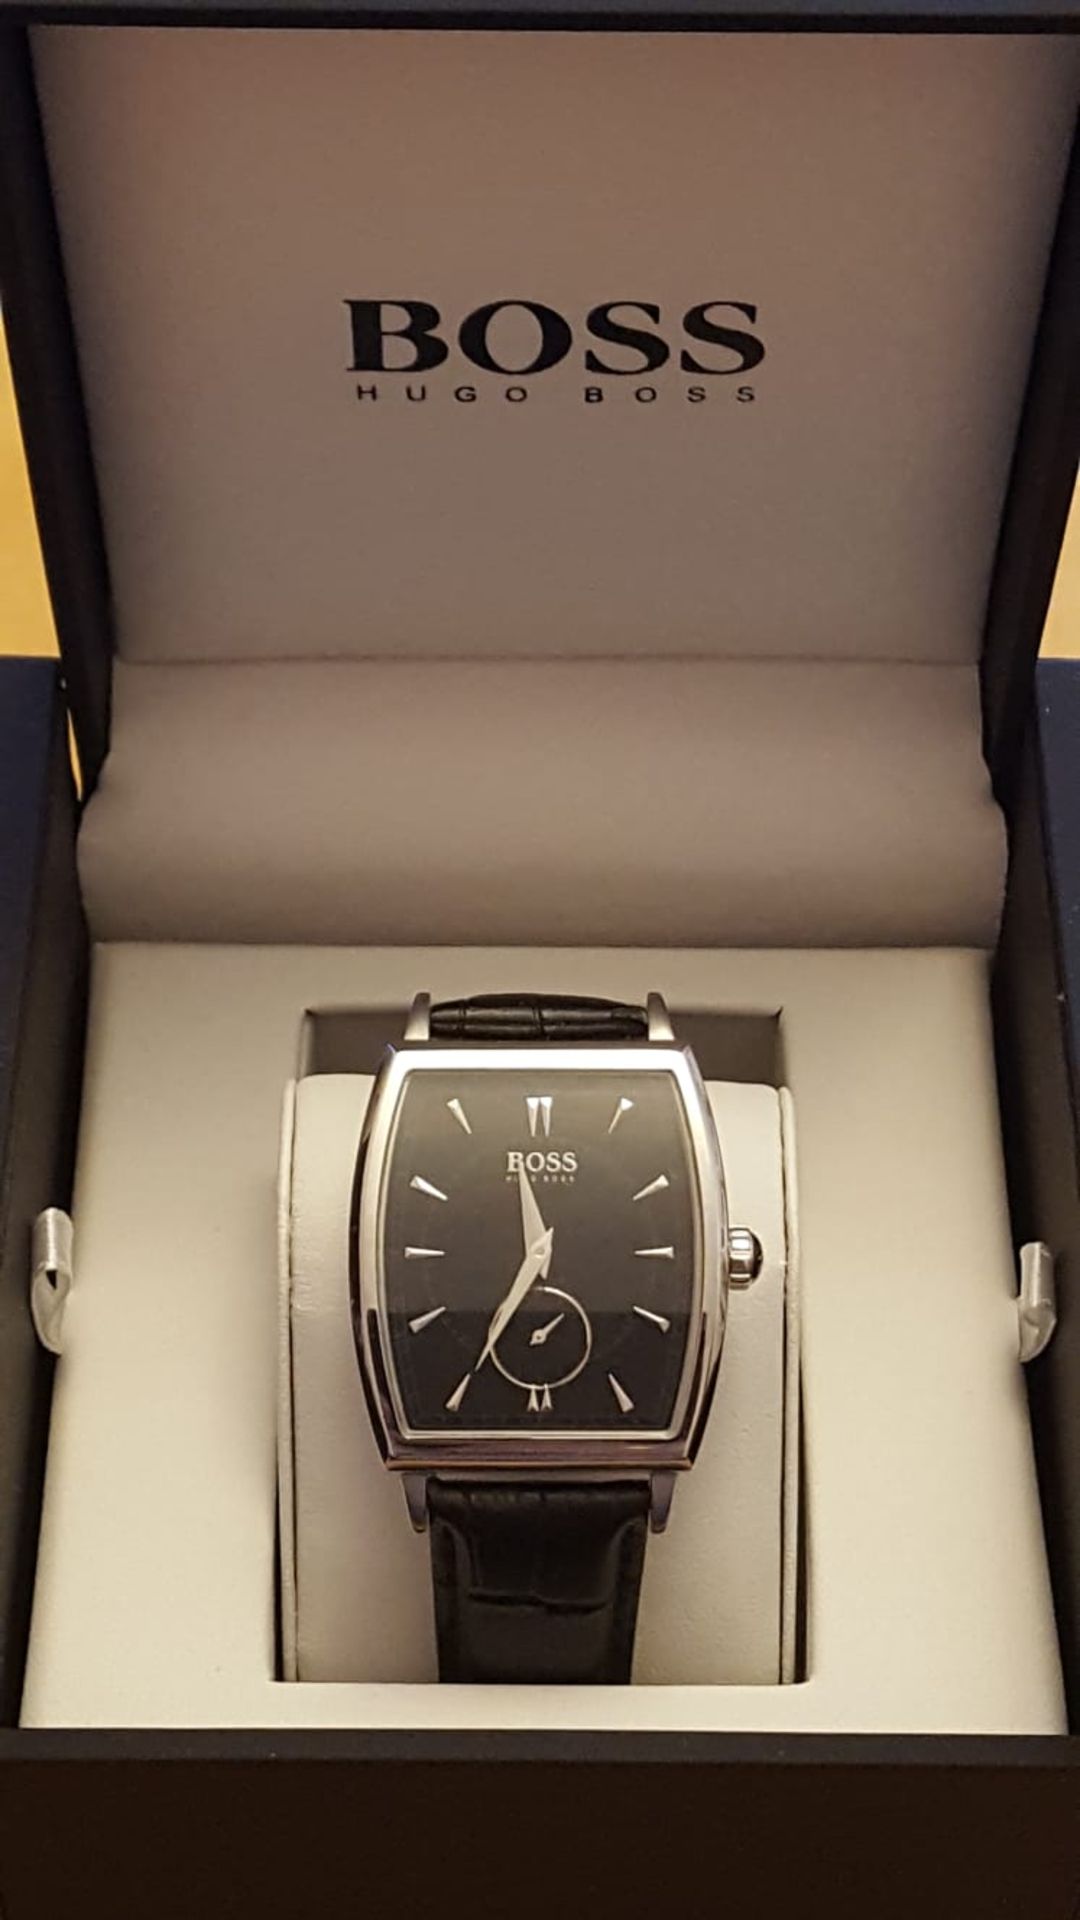 Brand New Hugo Boss Mens Classic Watch, Hb1512845, Black Dial And Black Leather Strap, Complete With - Image 2 of 2